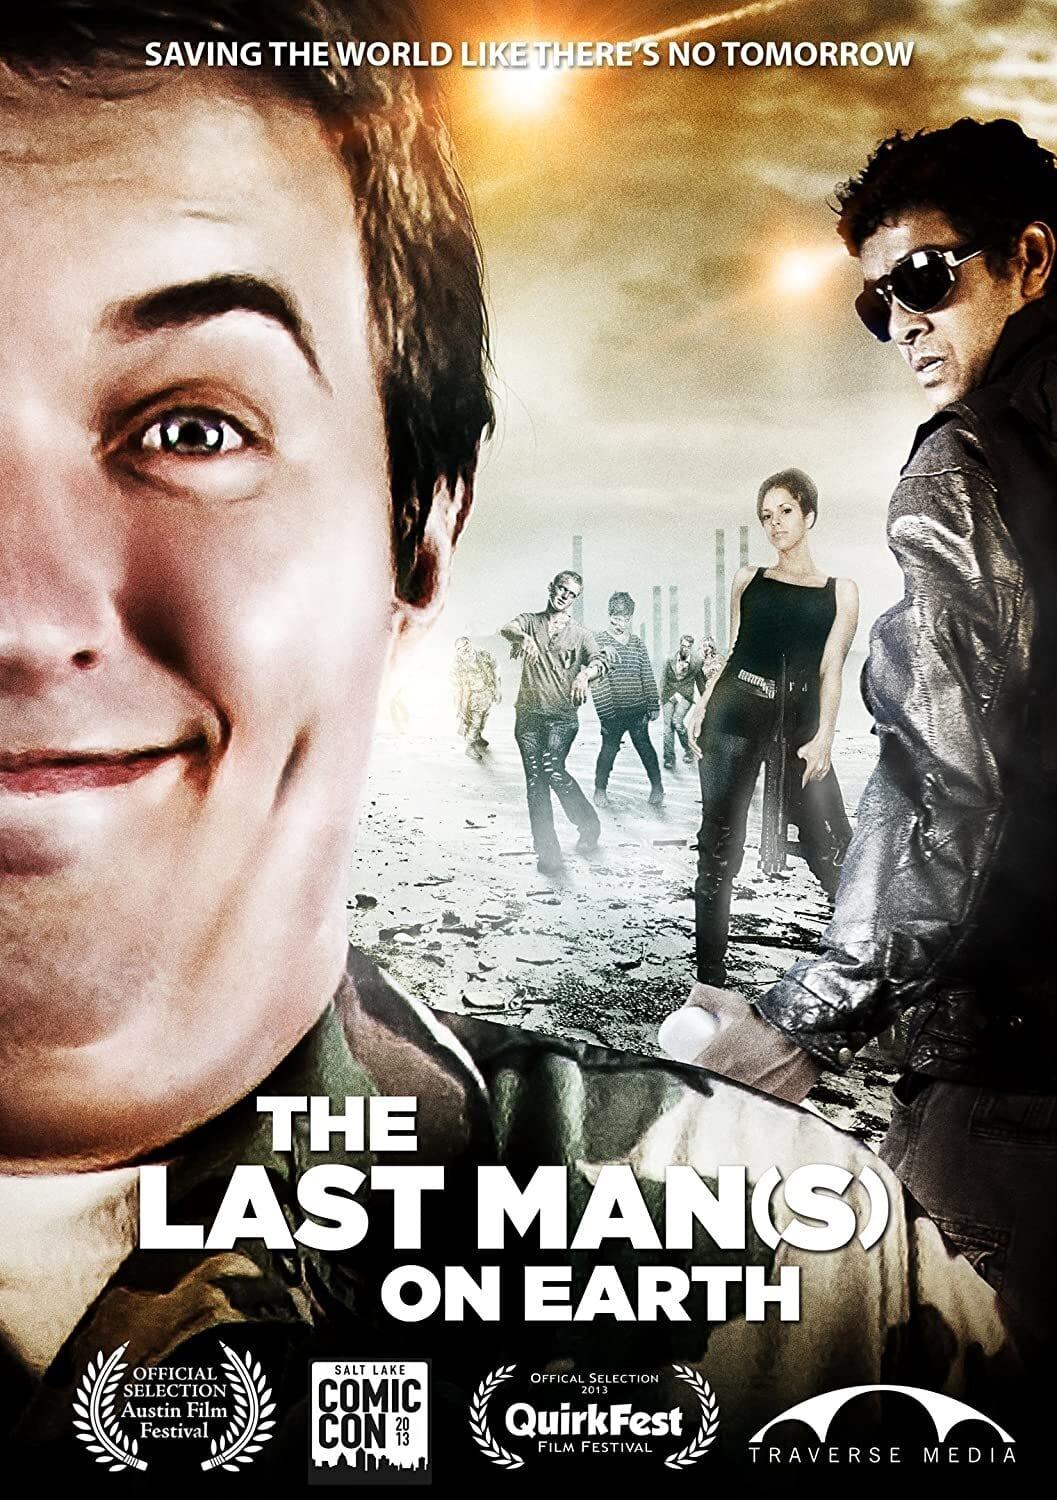 The Last Man(s) on Earth poster